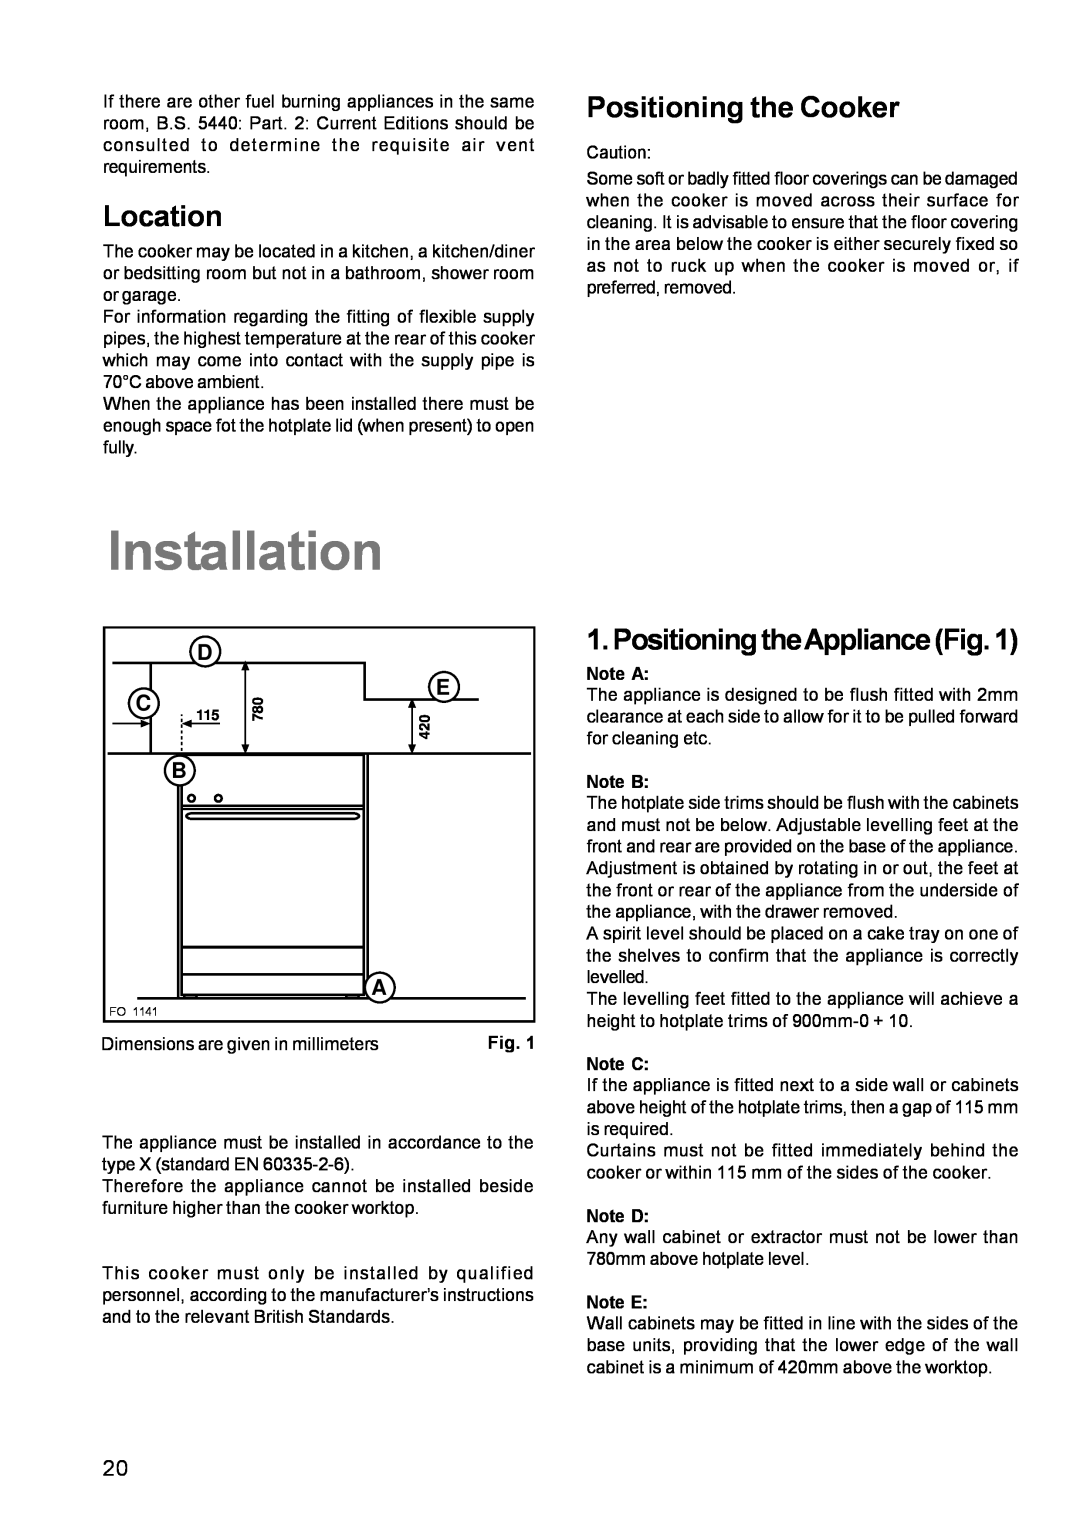 Zanussi ZCM 631 manual Location, Positioning the Cooker, PositioningtheAppliance Fig, Dimensions are given in millimeters 